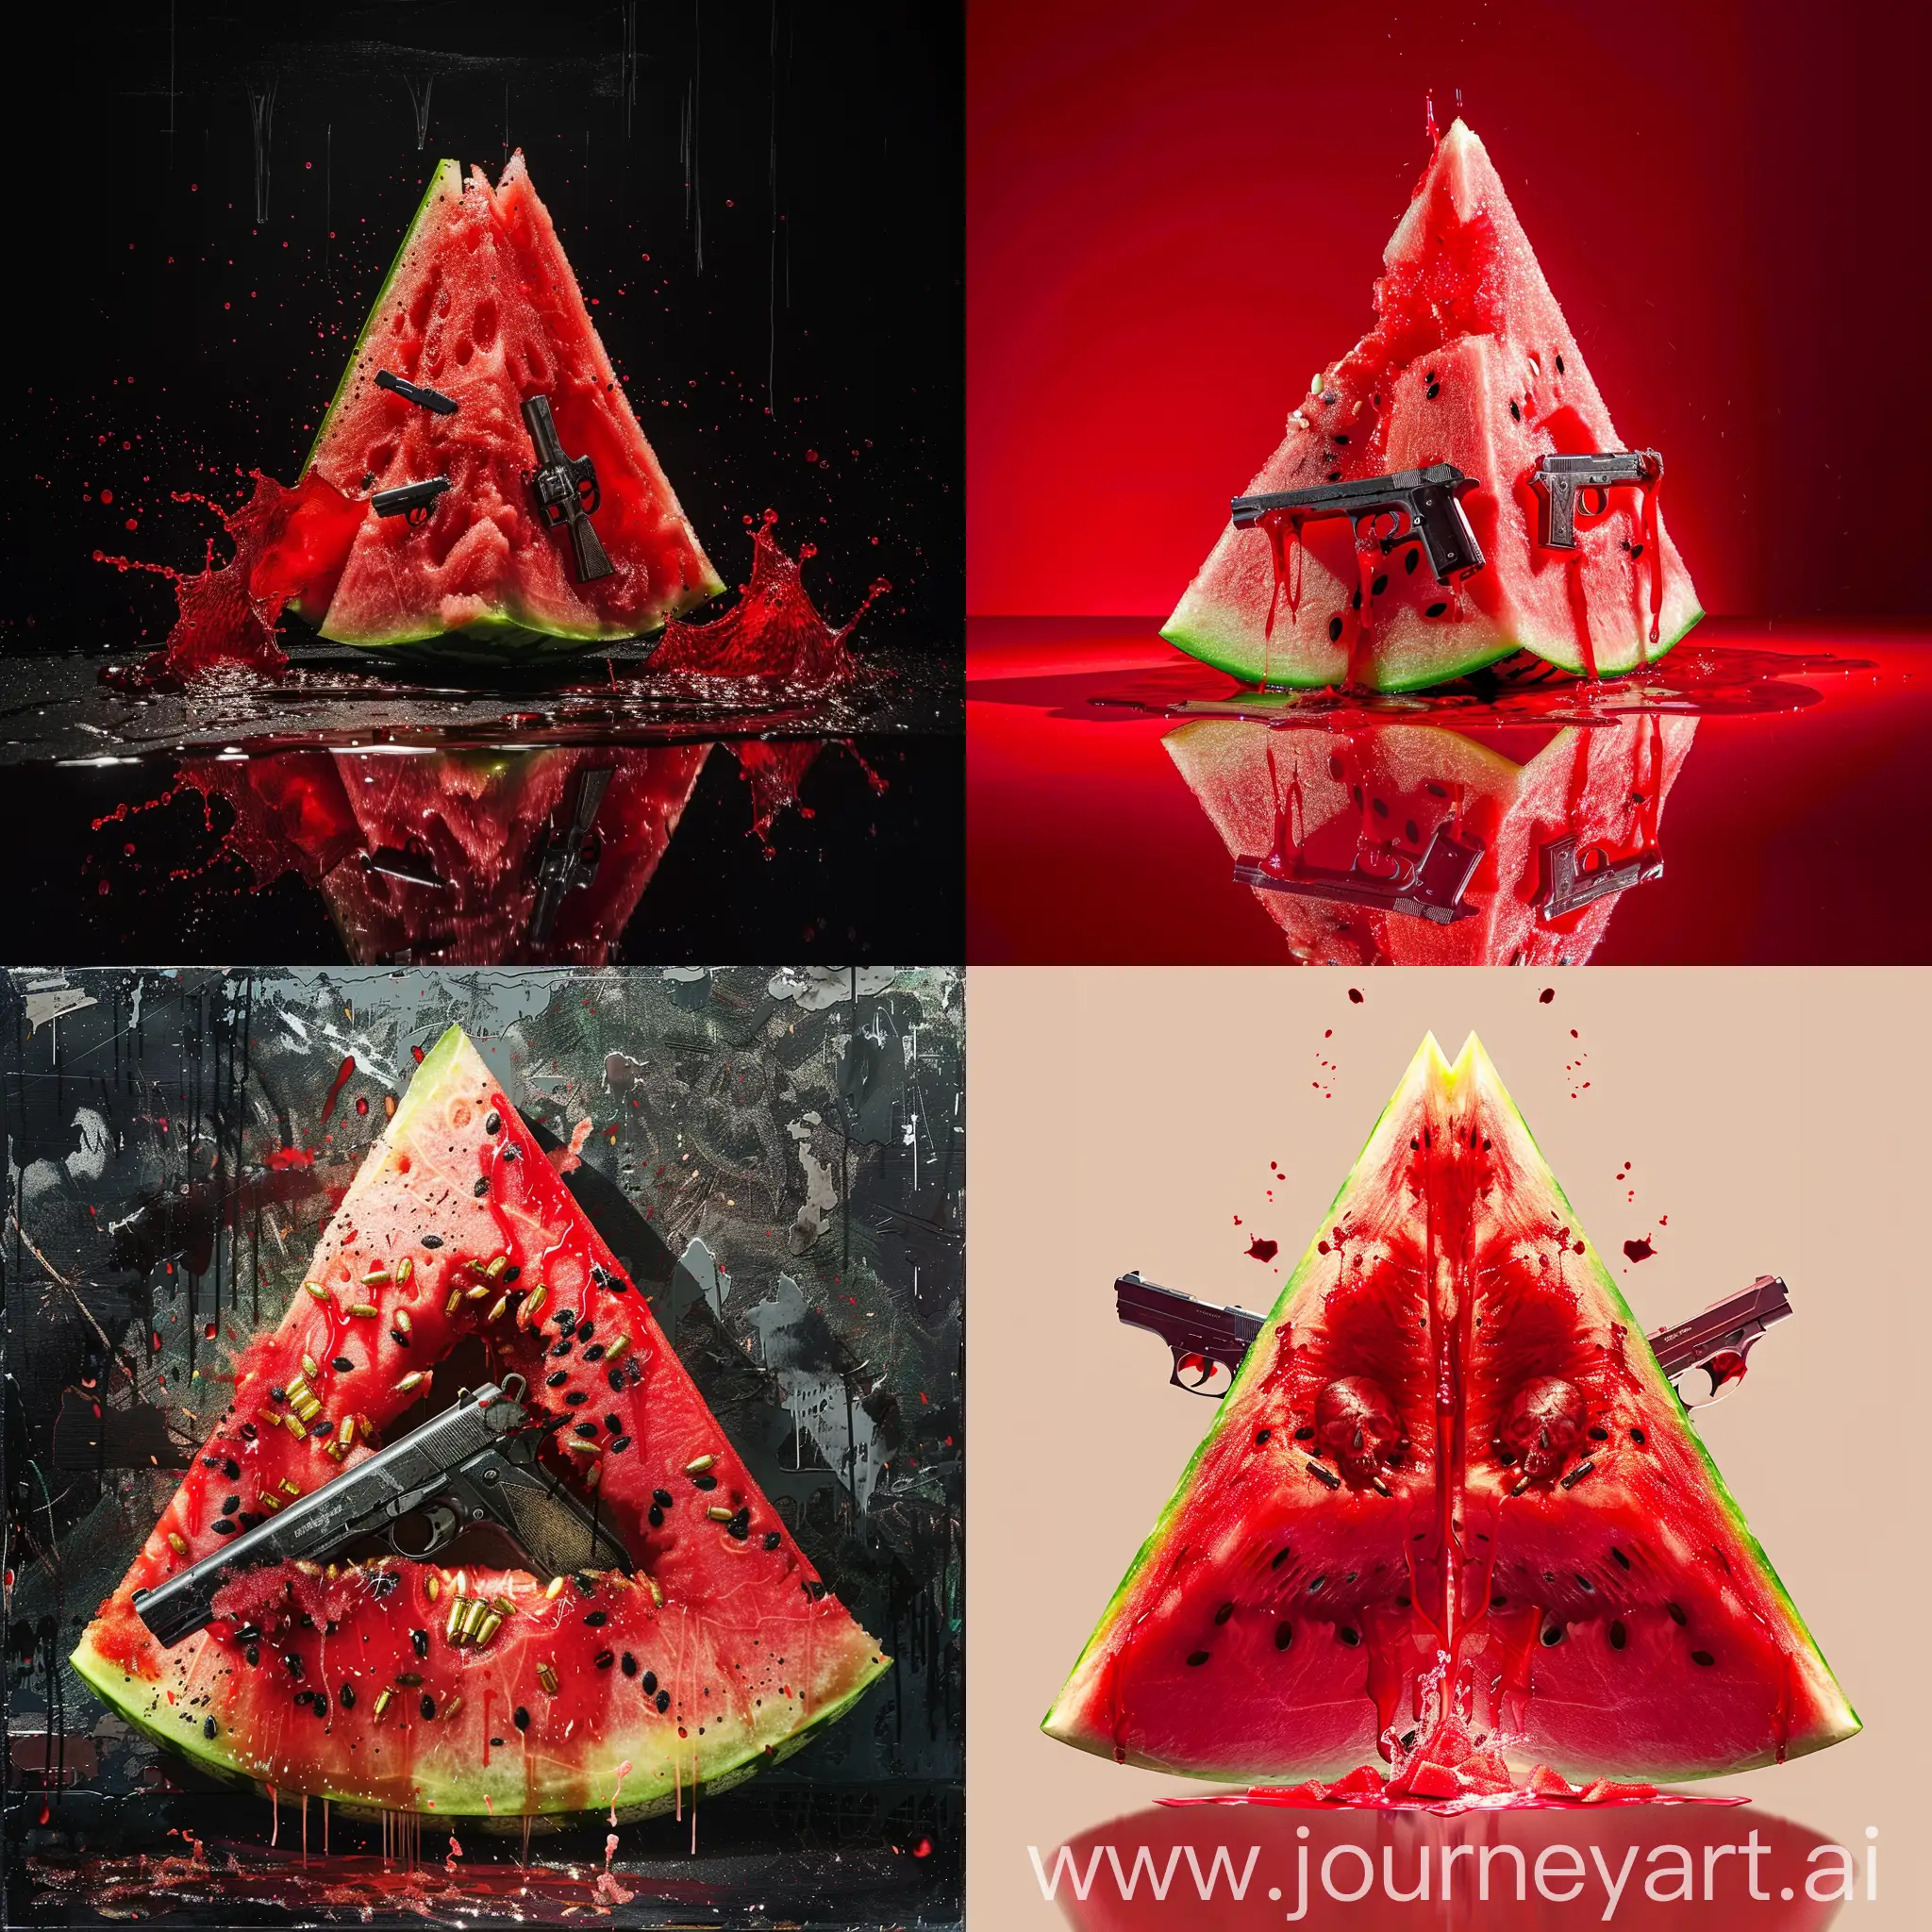 TRIANGLED WATERMELON WITH BLOOD AND GUNS